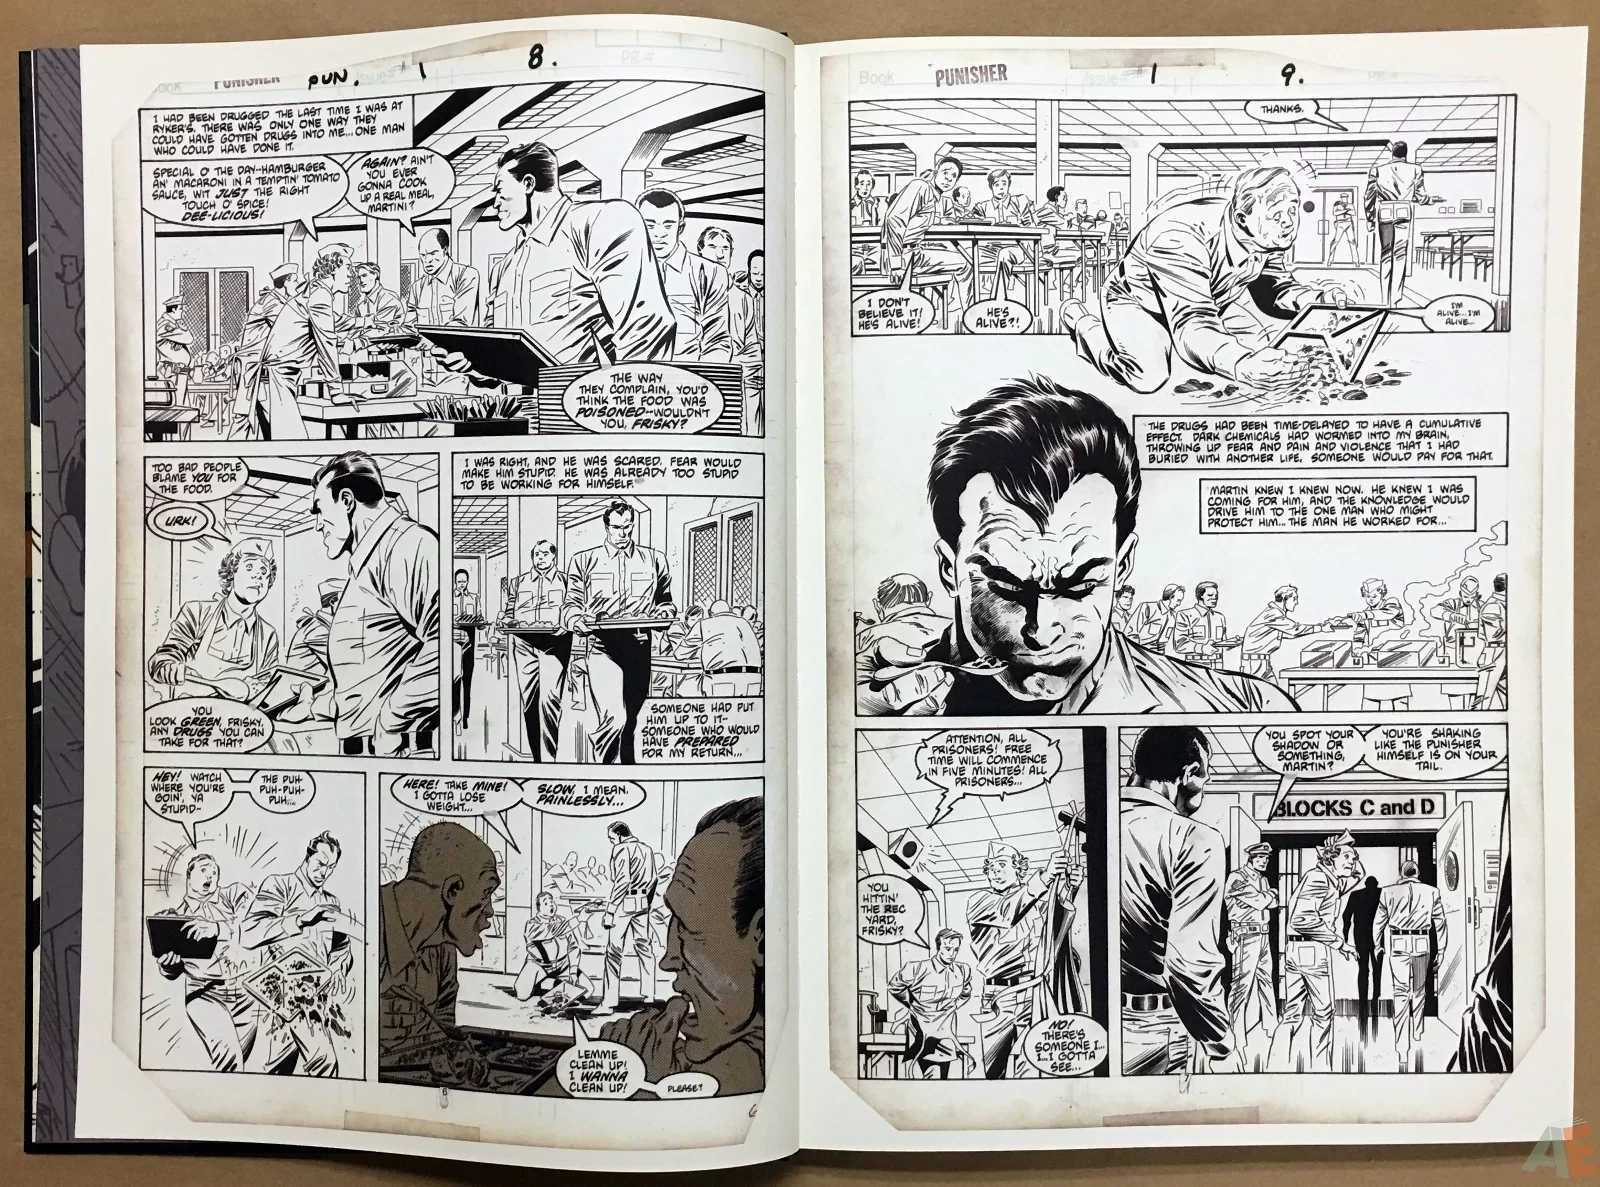 Mike Zeck’s Classic Marvel Stories Artist’s Edition